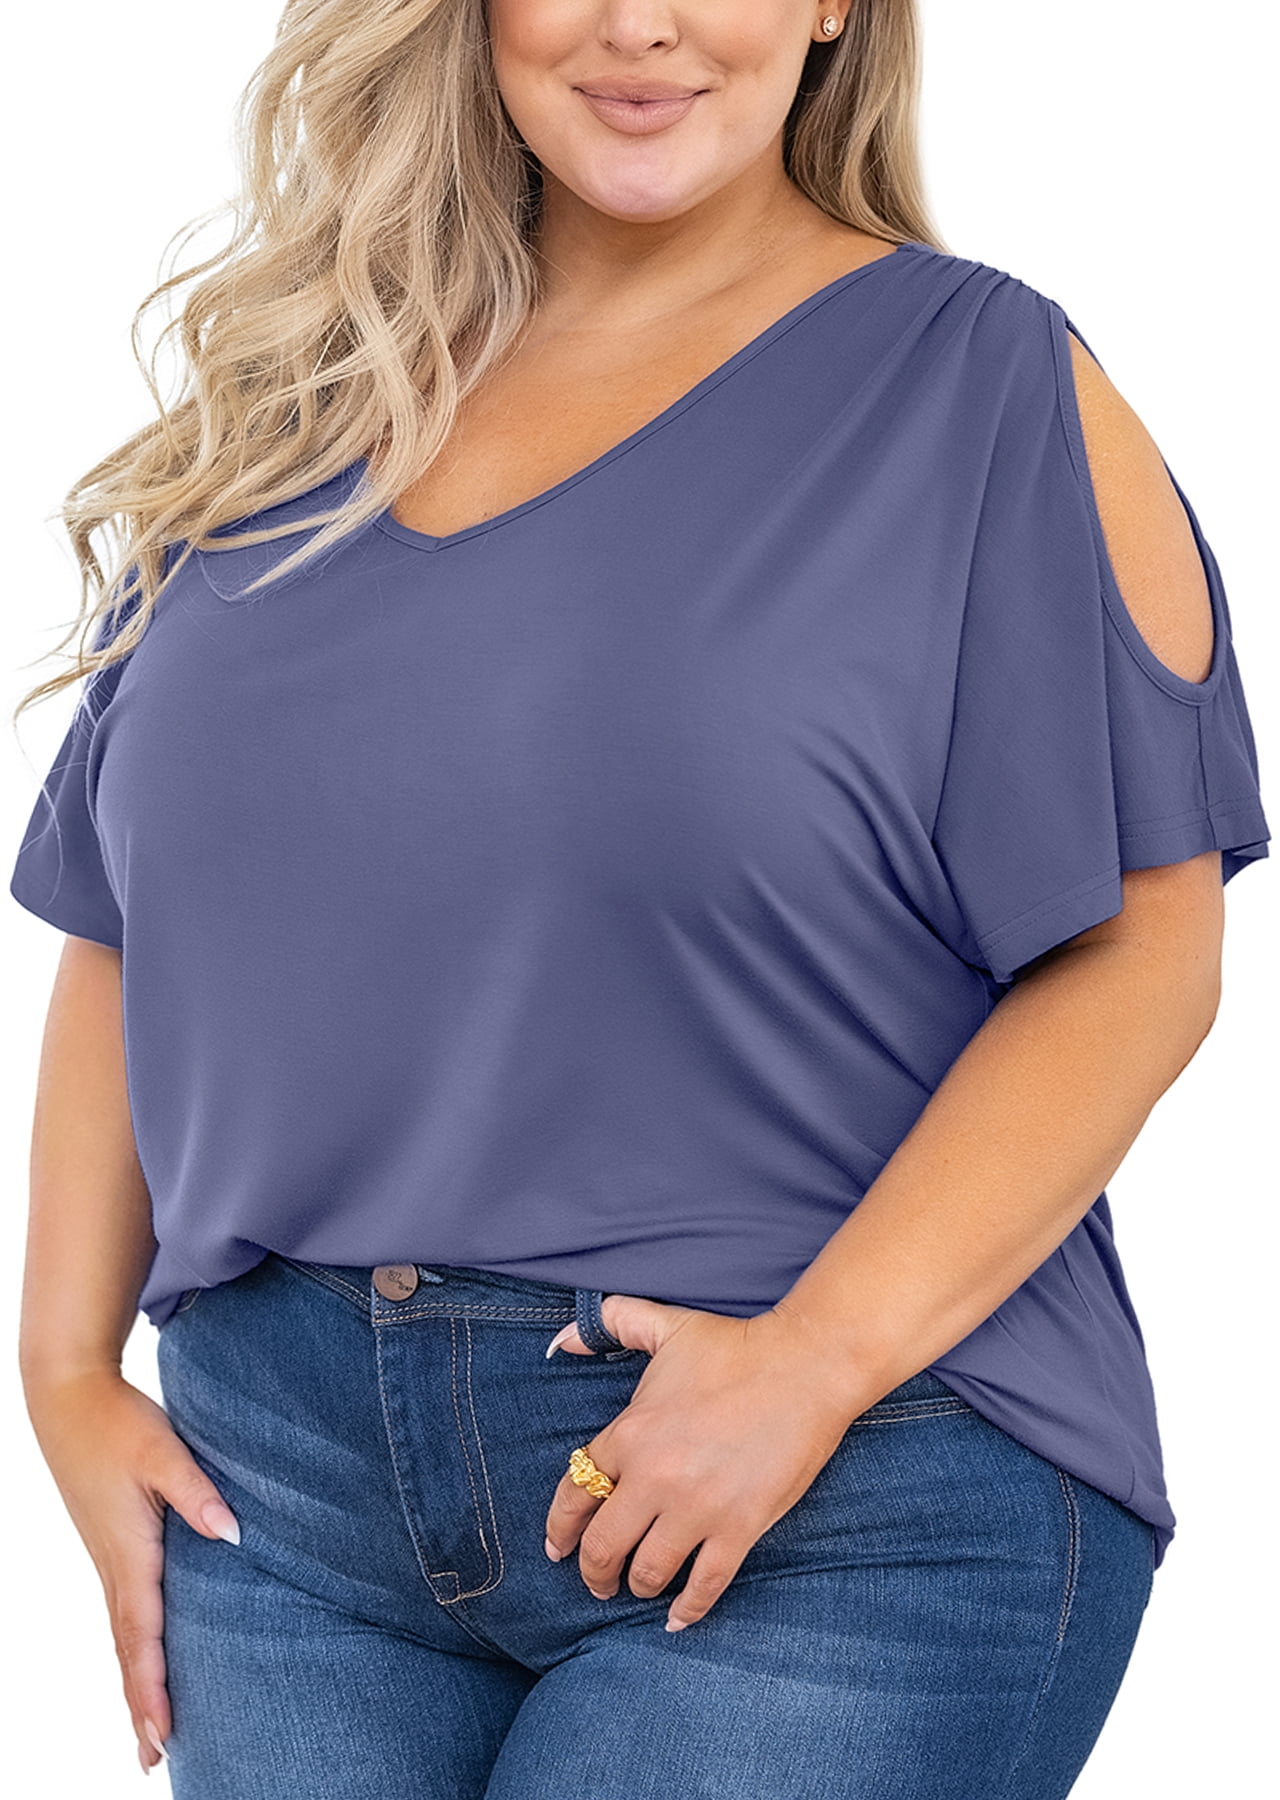 SHOWMALL Plus Size Tops for Women Cold Shoulder Clothes Gray Blue 1X Blouse  Short Sleeve Clothing V Neck Tunic Summer Shirts